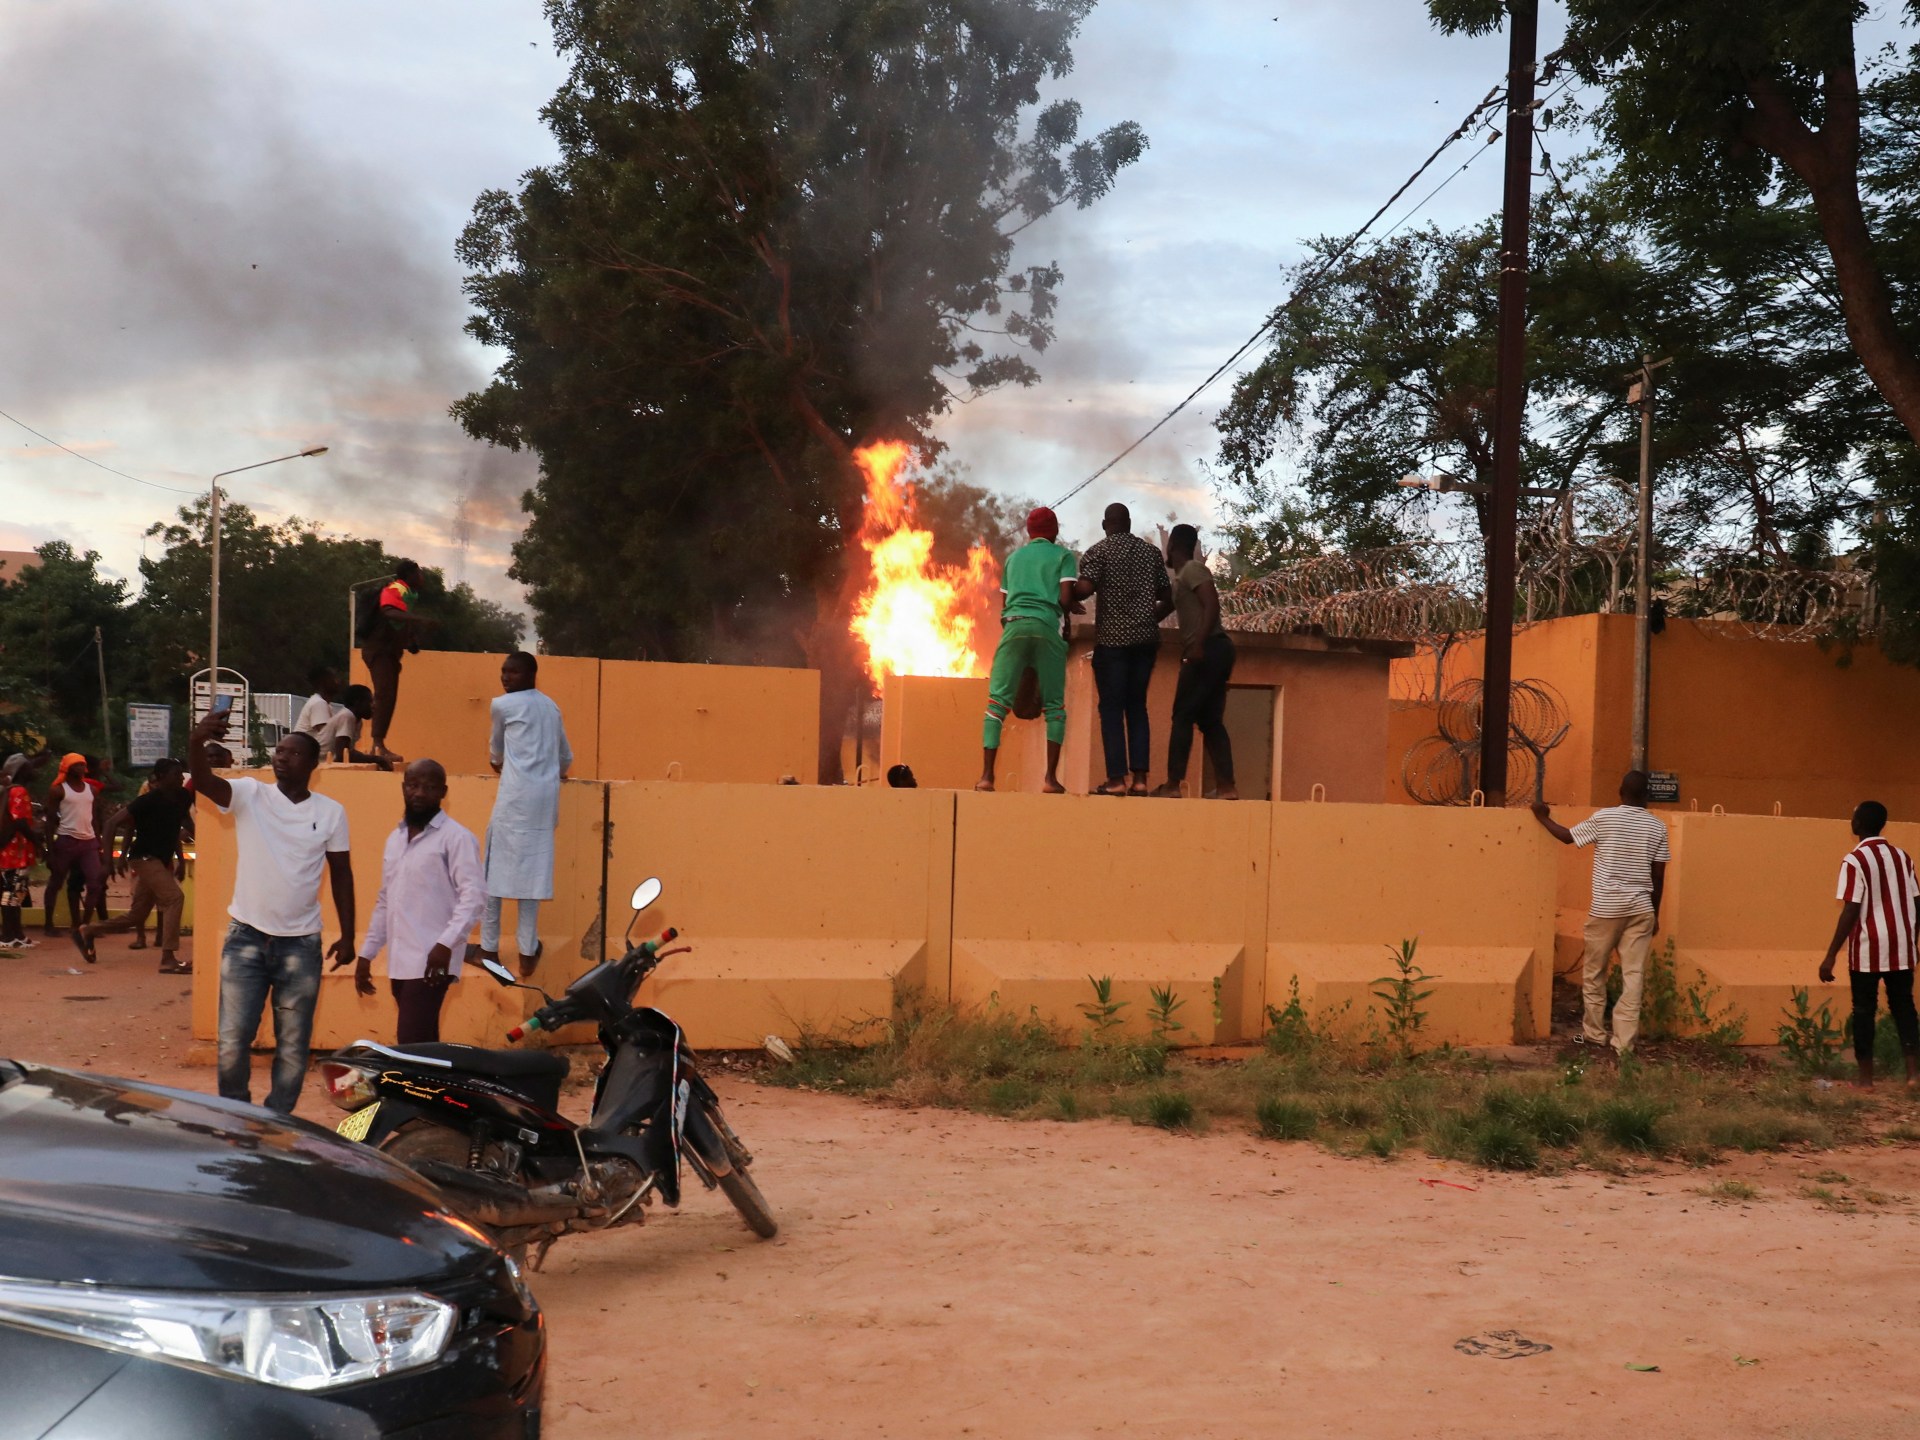 Burkina Faso: Tear gas fired at protesters outside French embassy